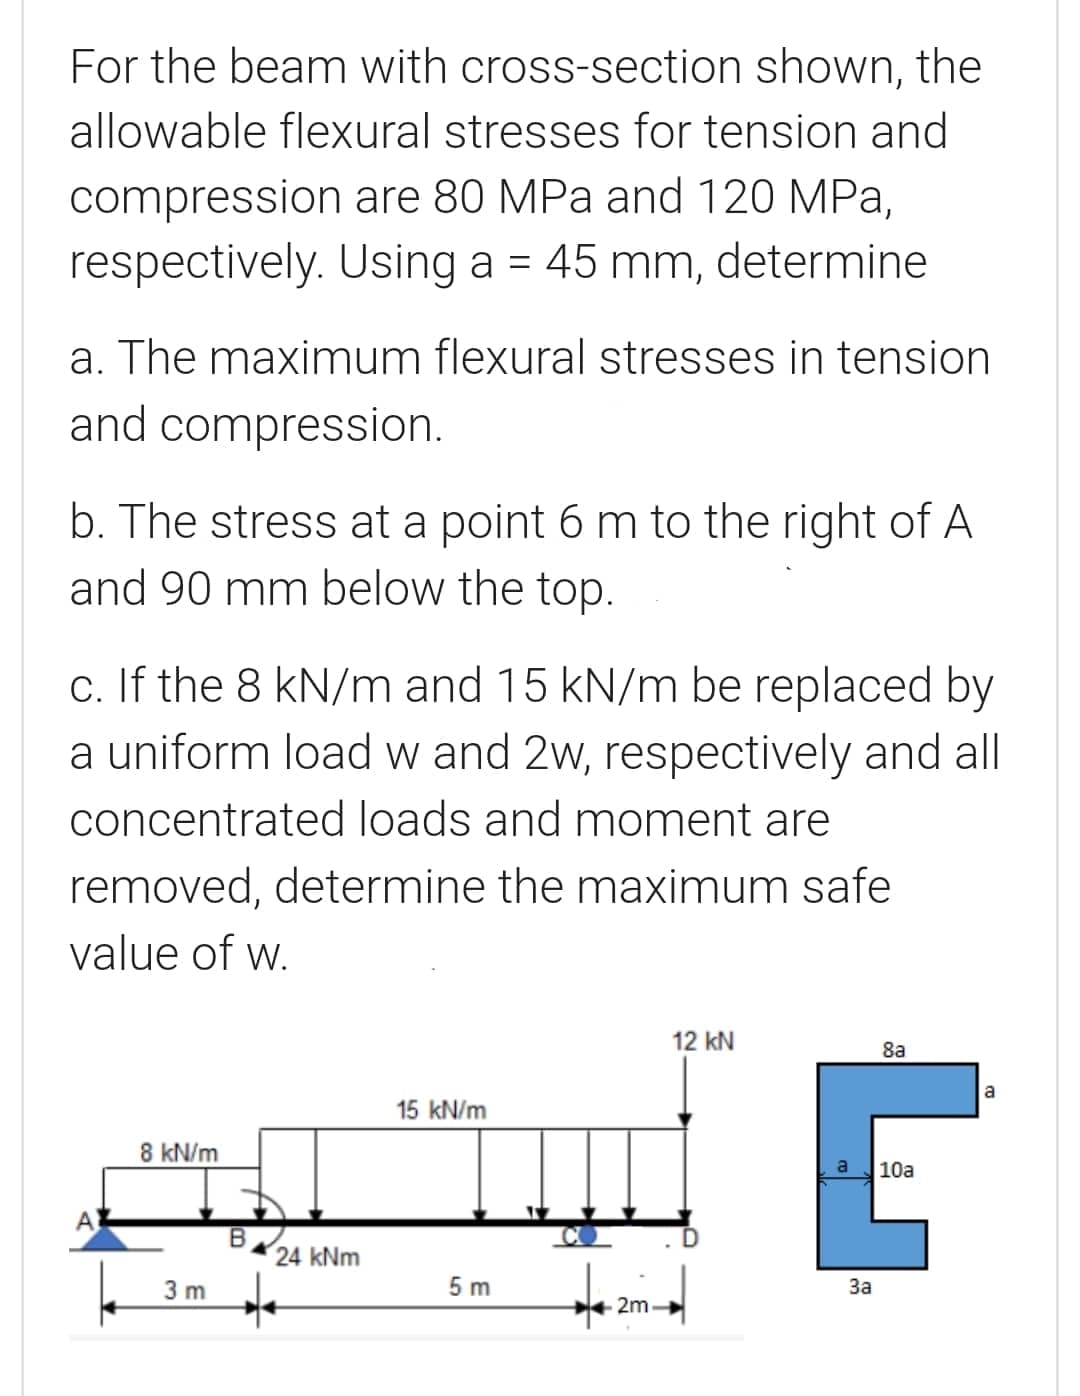 For the beam with cross-section shown, the
allowable flexural stresses for tension and
compression are 80 MPa and 120 MPa,
respectively. Using a = 45 mm, determine
a. The maximum flexural stresses in tension
and compression.
b. The stress at a point 6 m to the right of A
and 90 mm below the top.
c. If the 8 kN/m and 15 kN/m be replaced by
a uniform load w and 2w, respectively and all
concentrated loads and moment are
removed, determine the maximum safe
value of w.
12 kN
8a
a
15 kN/m
8 kN/m
a
10a
A
24 kNm
3 m
5 m
За
2m
